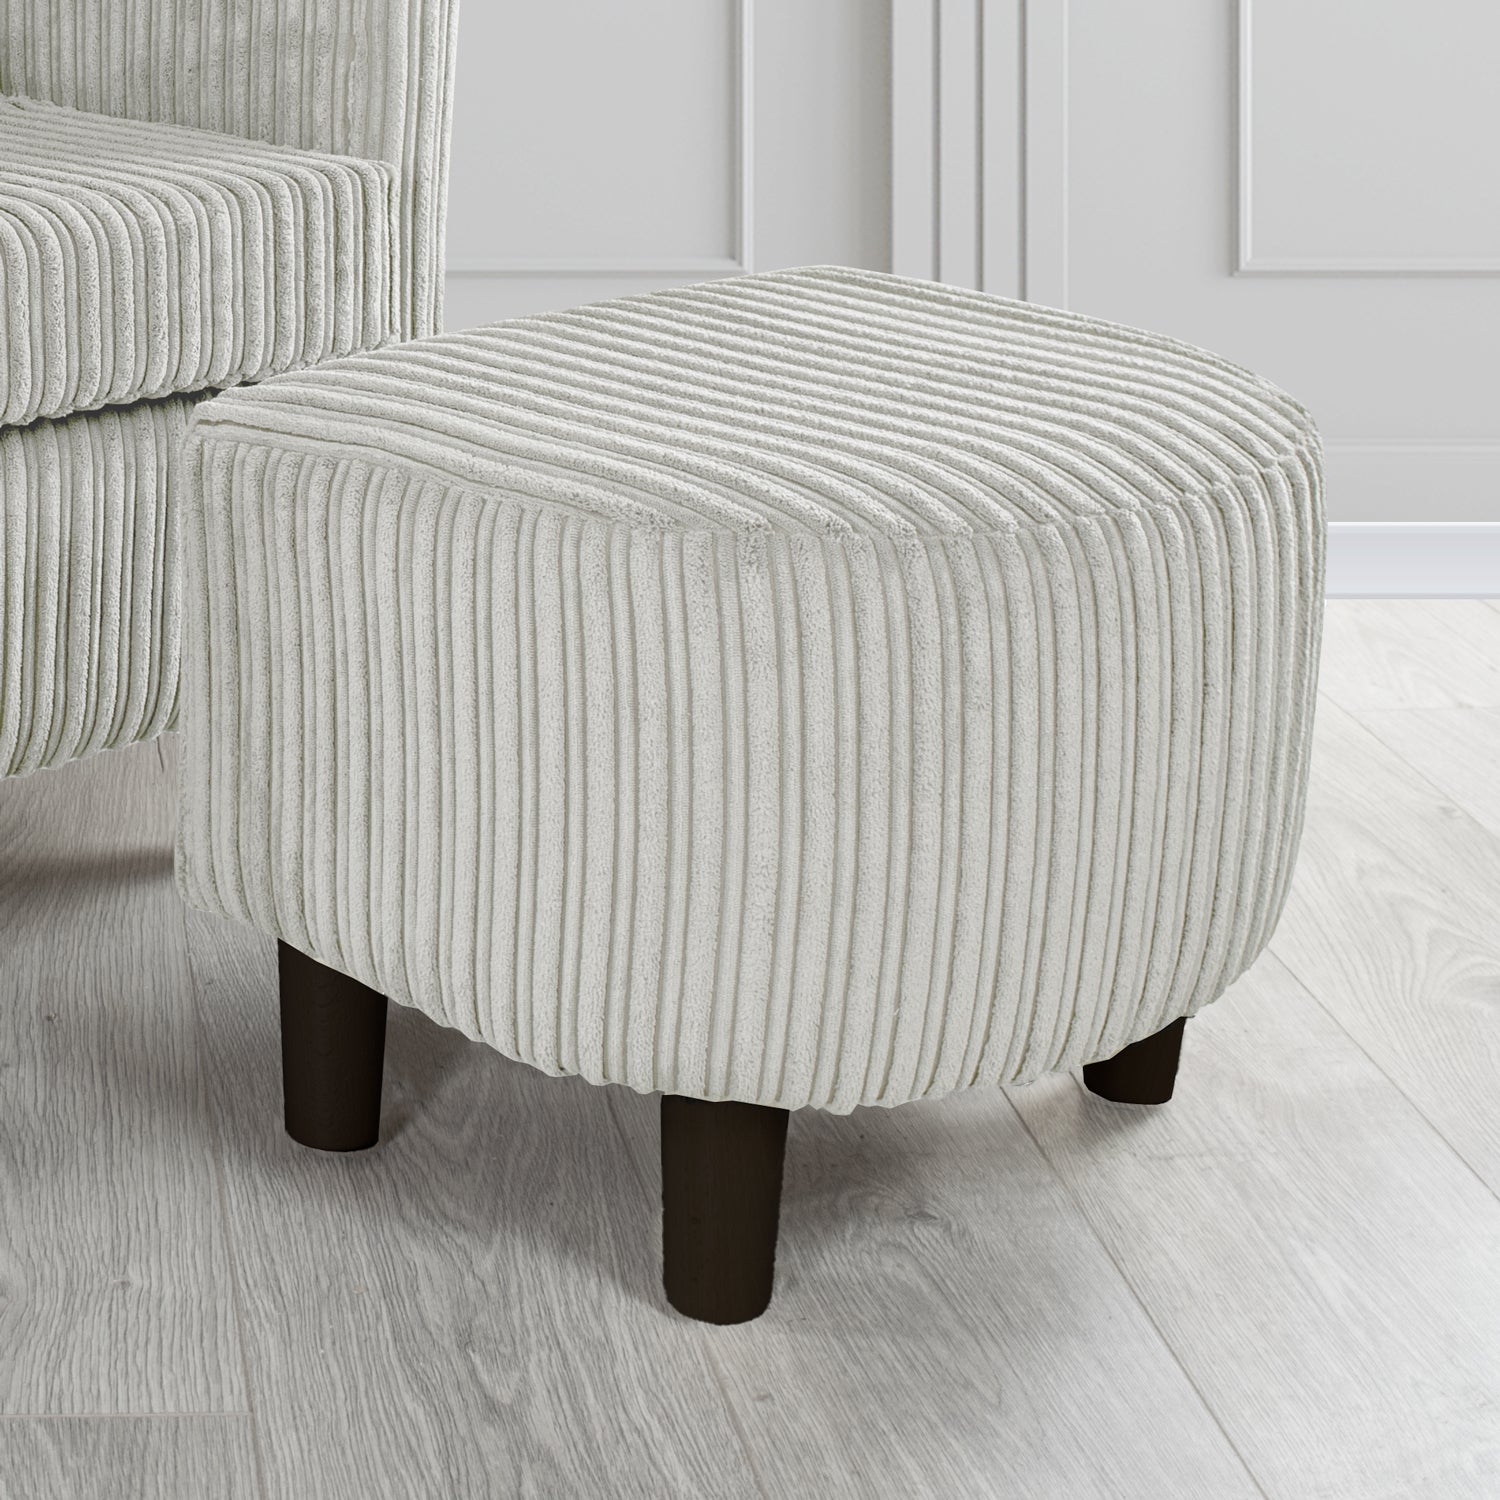 Tuscany Conway Silver Plain Textured Fabric Footstool (6587027456042)